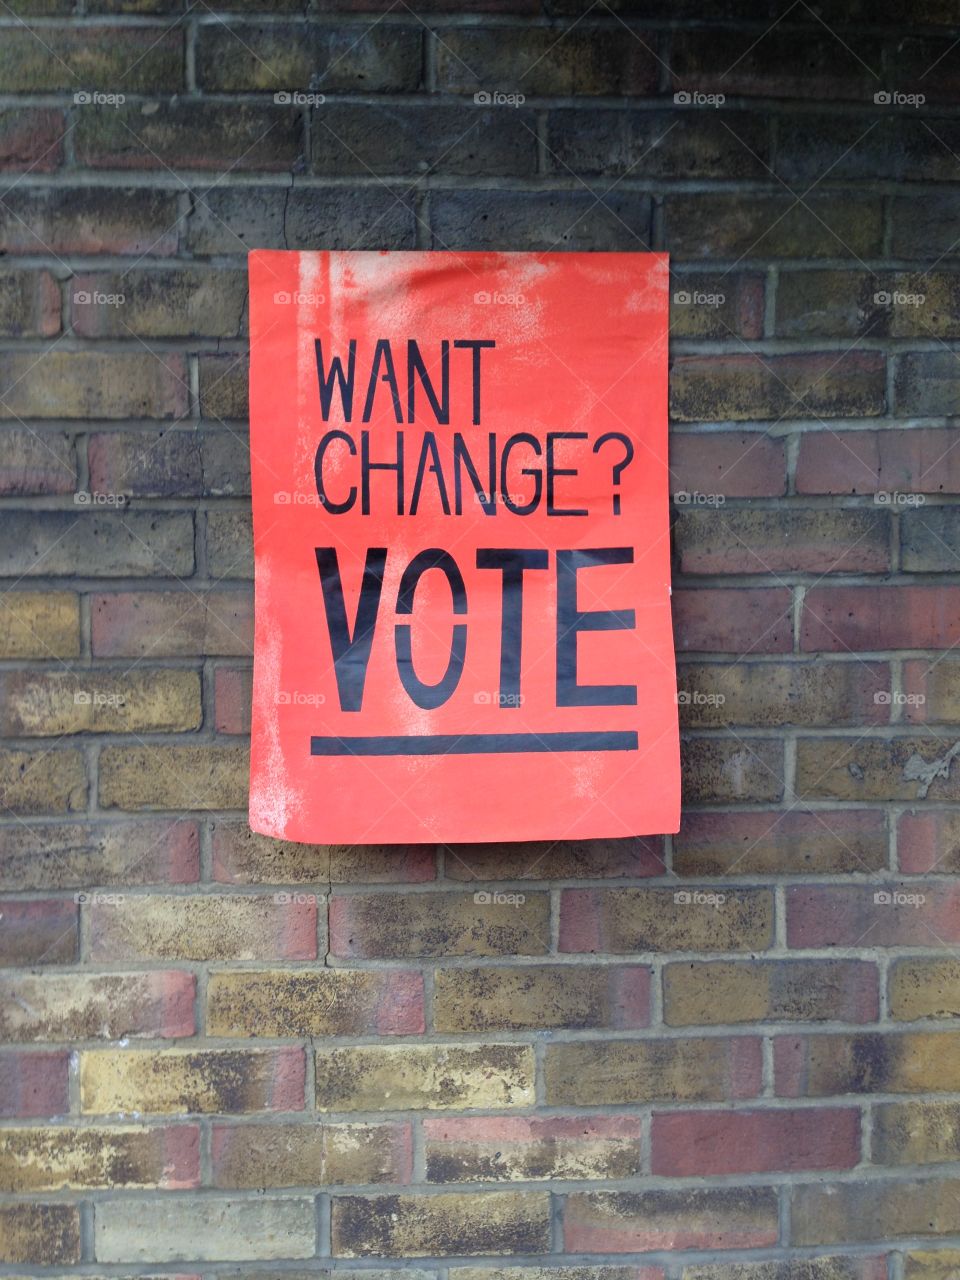 Want change vote poster in wall